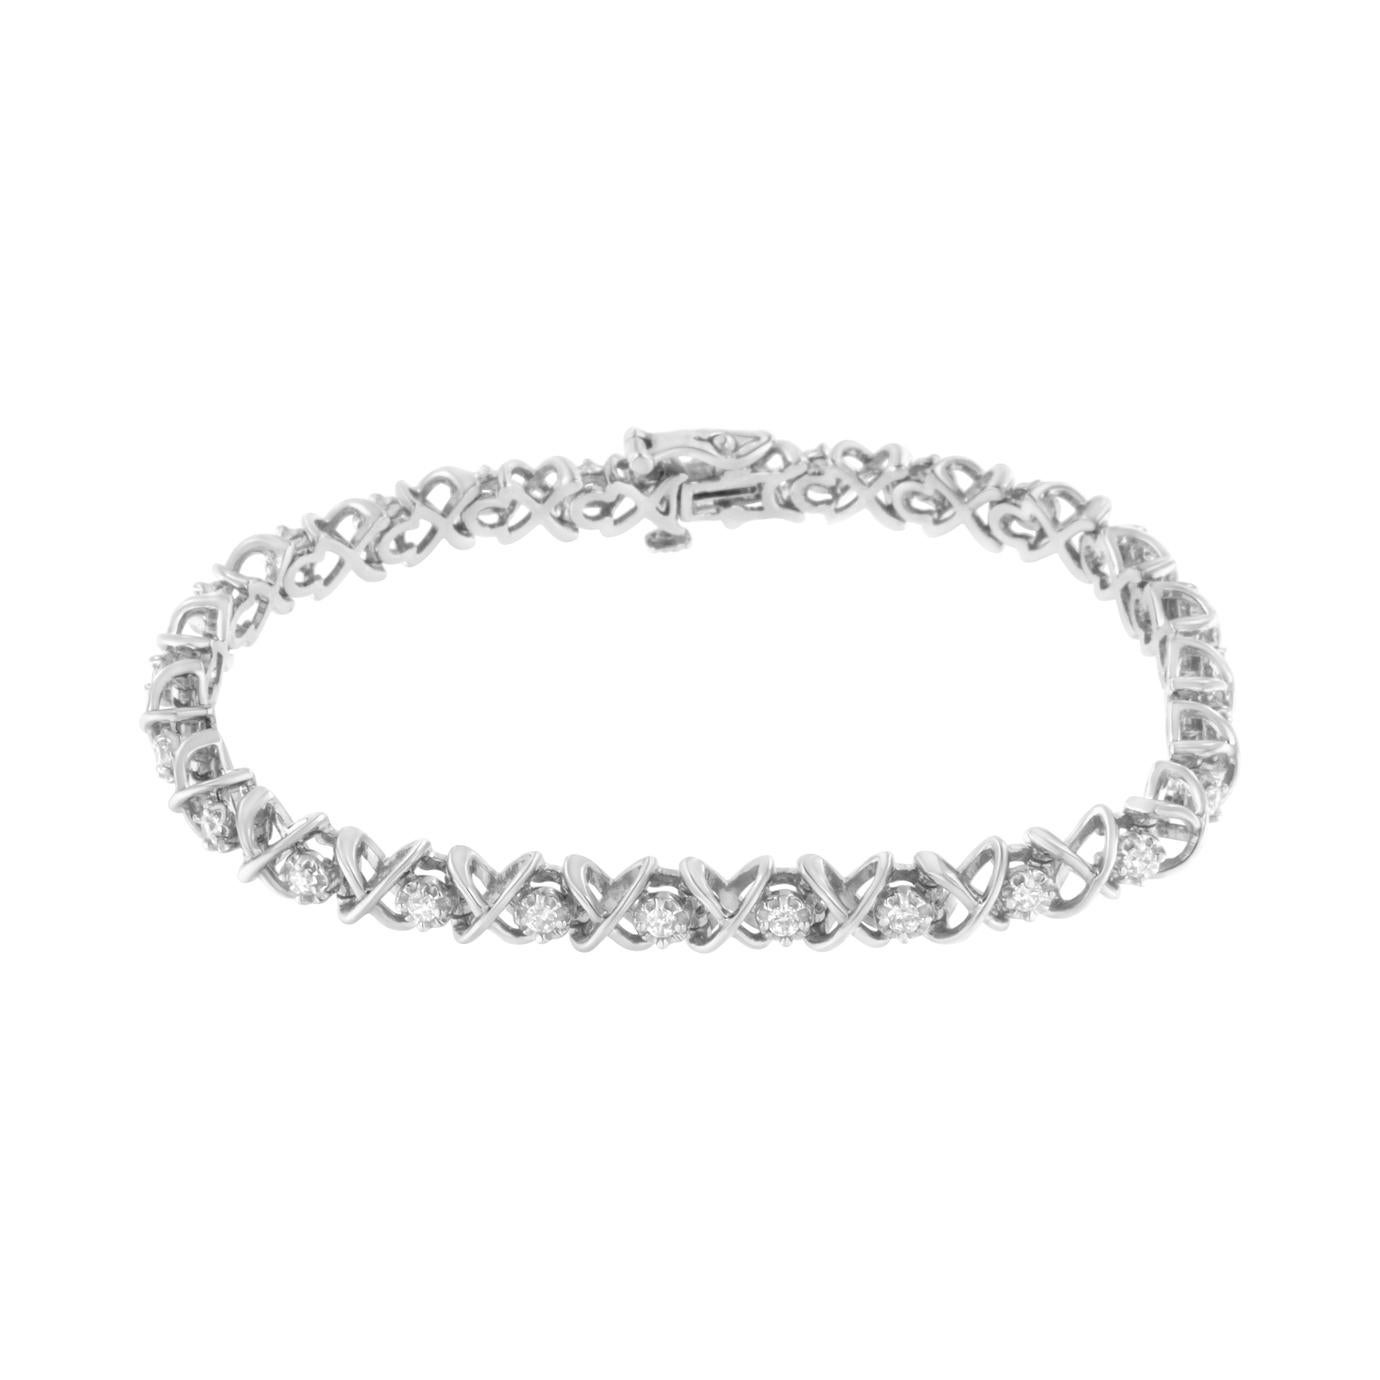 Crafted in polished sterling silver, this link bracelet features 1ct TDW of diamonds. Cool silver X shaped links alternate with prong set round cut diamonds to create this dazzling design. A box with clasp keeps the bracelet secure.

'Video